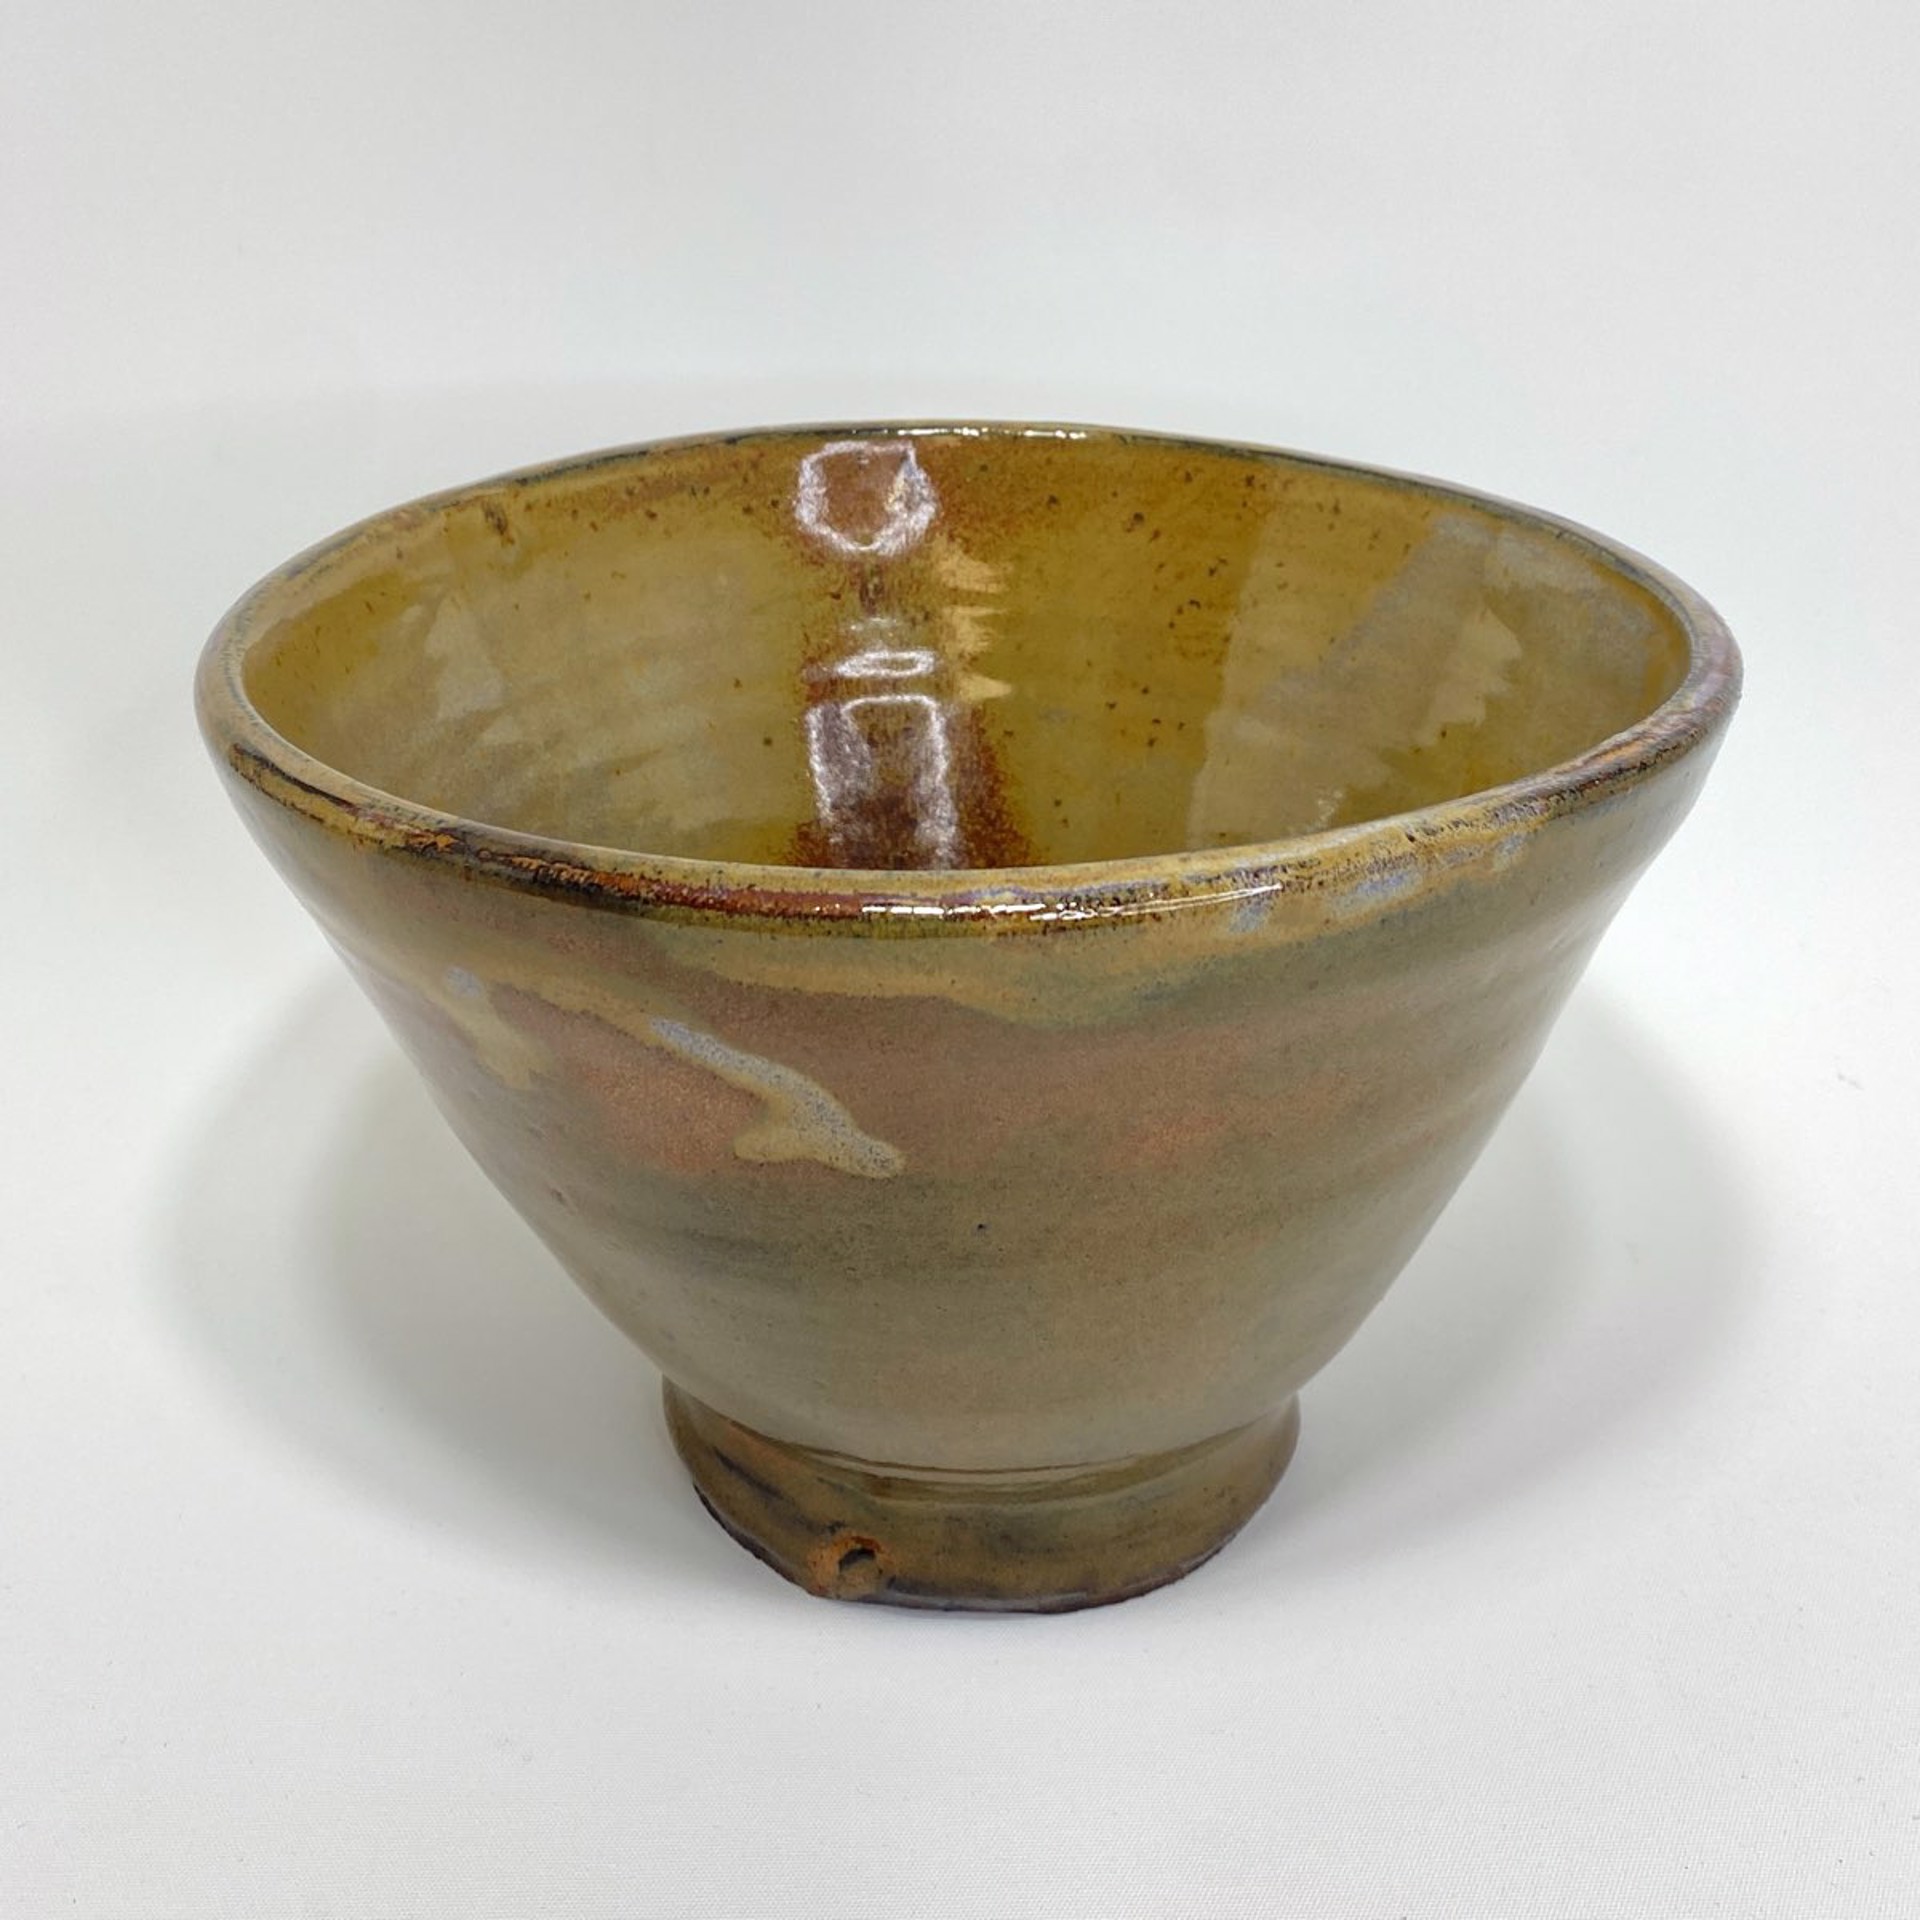 "Earth Tone Bowl" by Justin S. by One Step Beyond